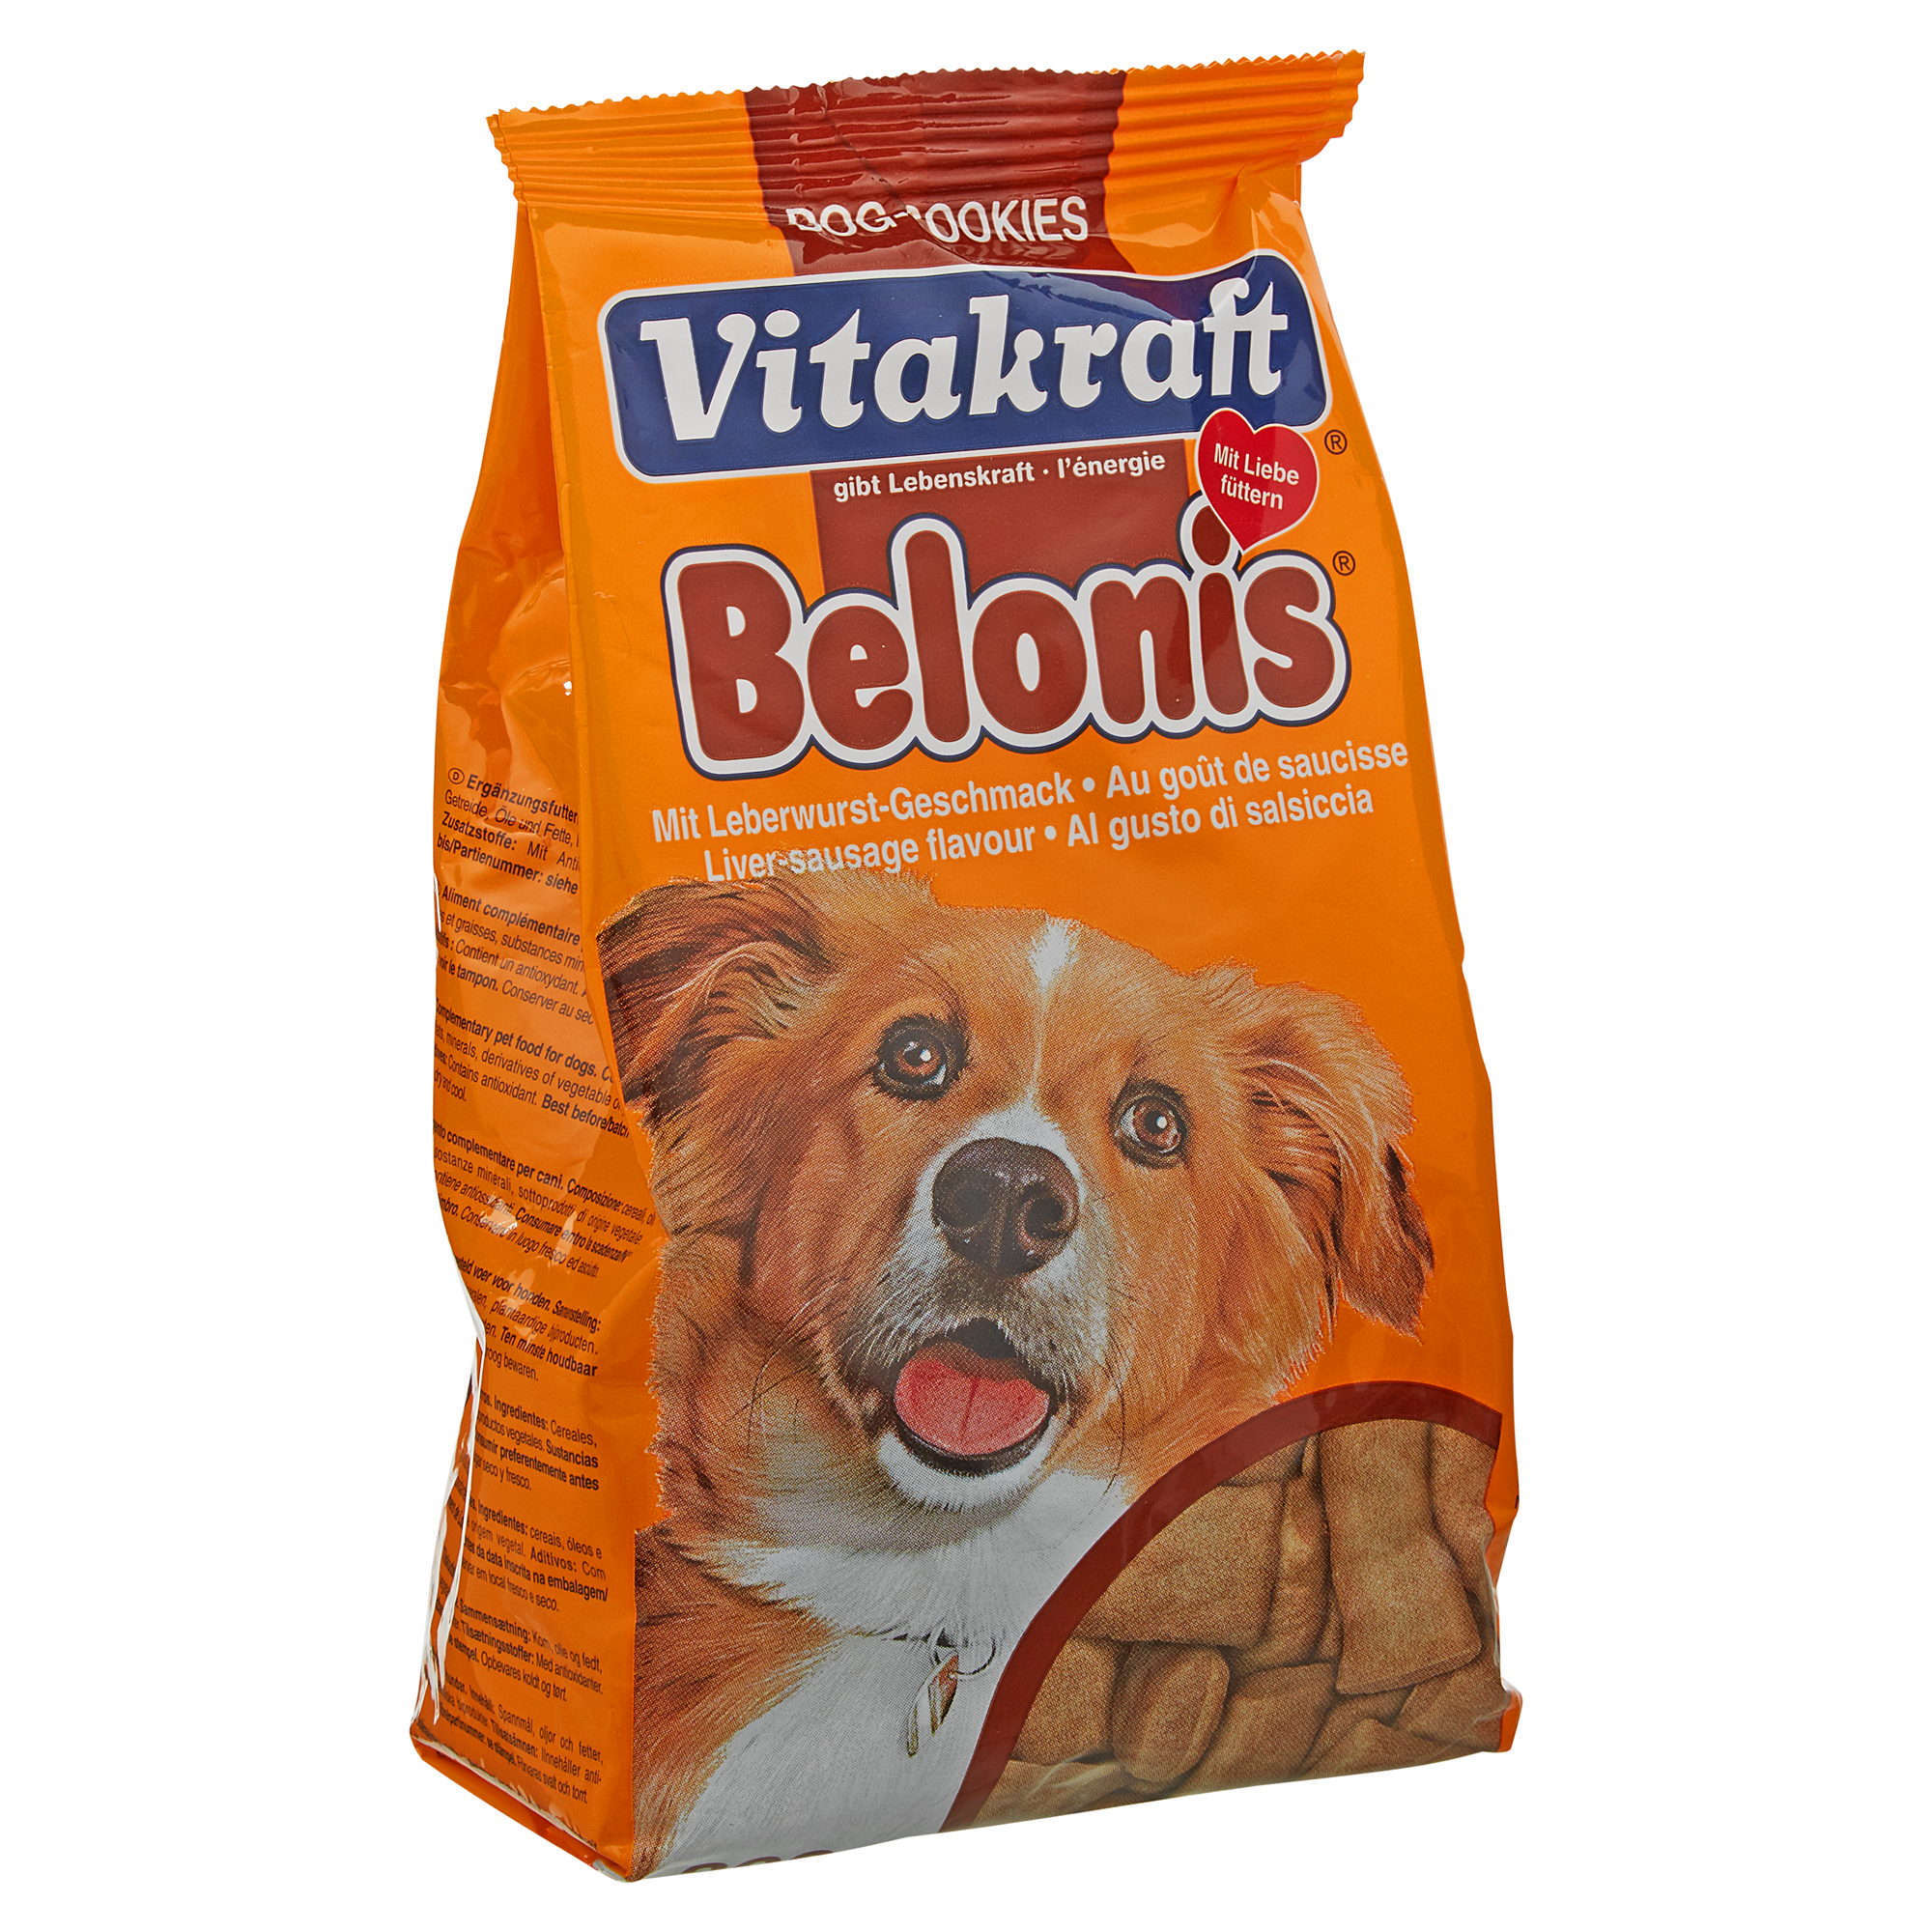 Hundesnack "Belonis" mit Leberwurst 300 g + product picture